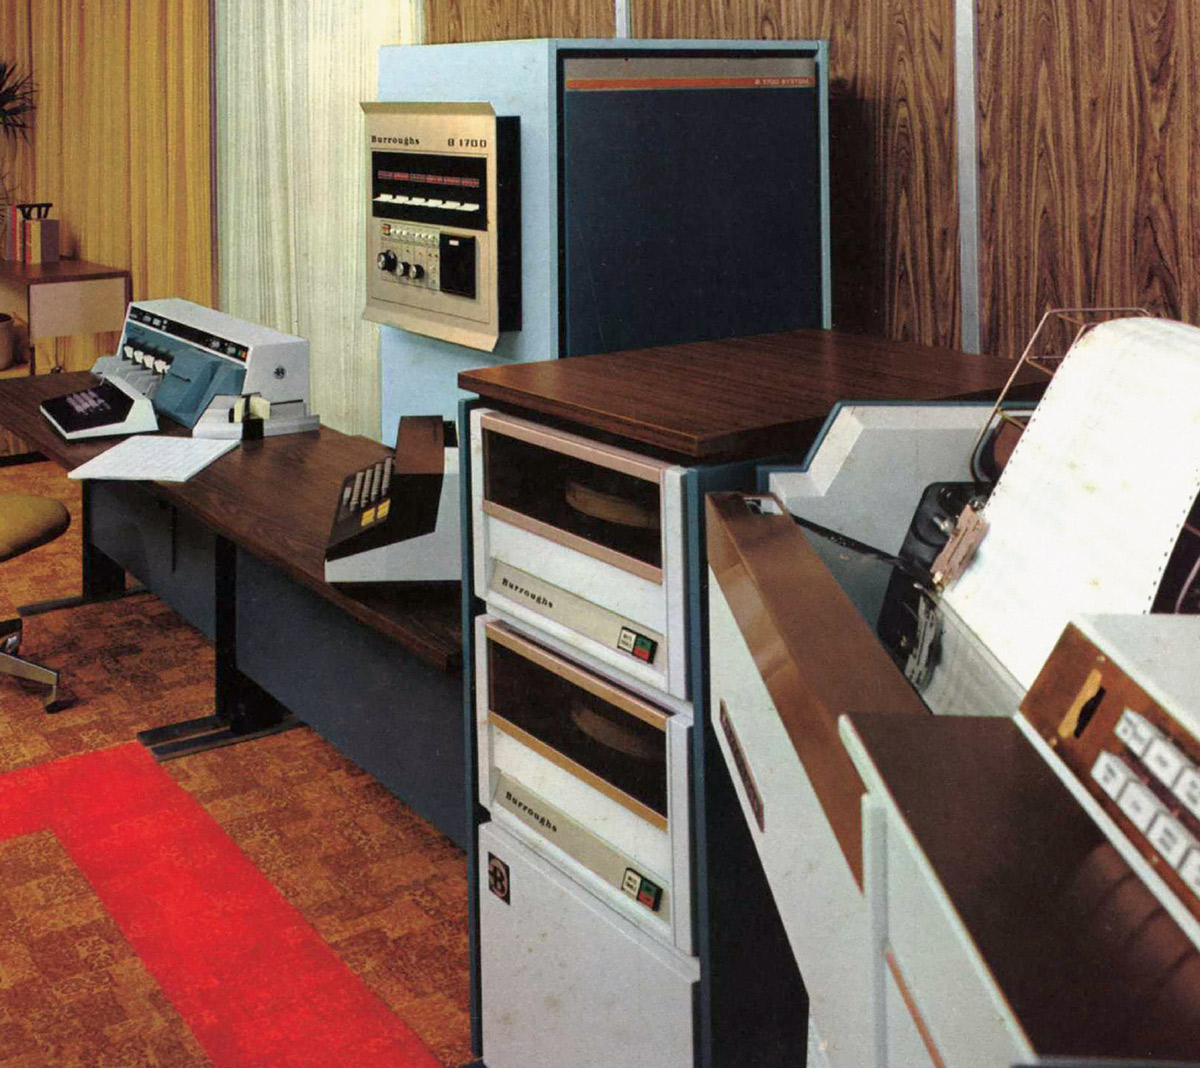 A photograph of the Burroughs B Seventeen Hundred computer at the State University of New York at Buffalo in the early nineteen seventies. The computer was used to emulate a ternary computing system.